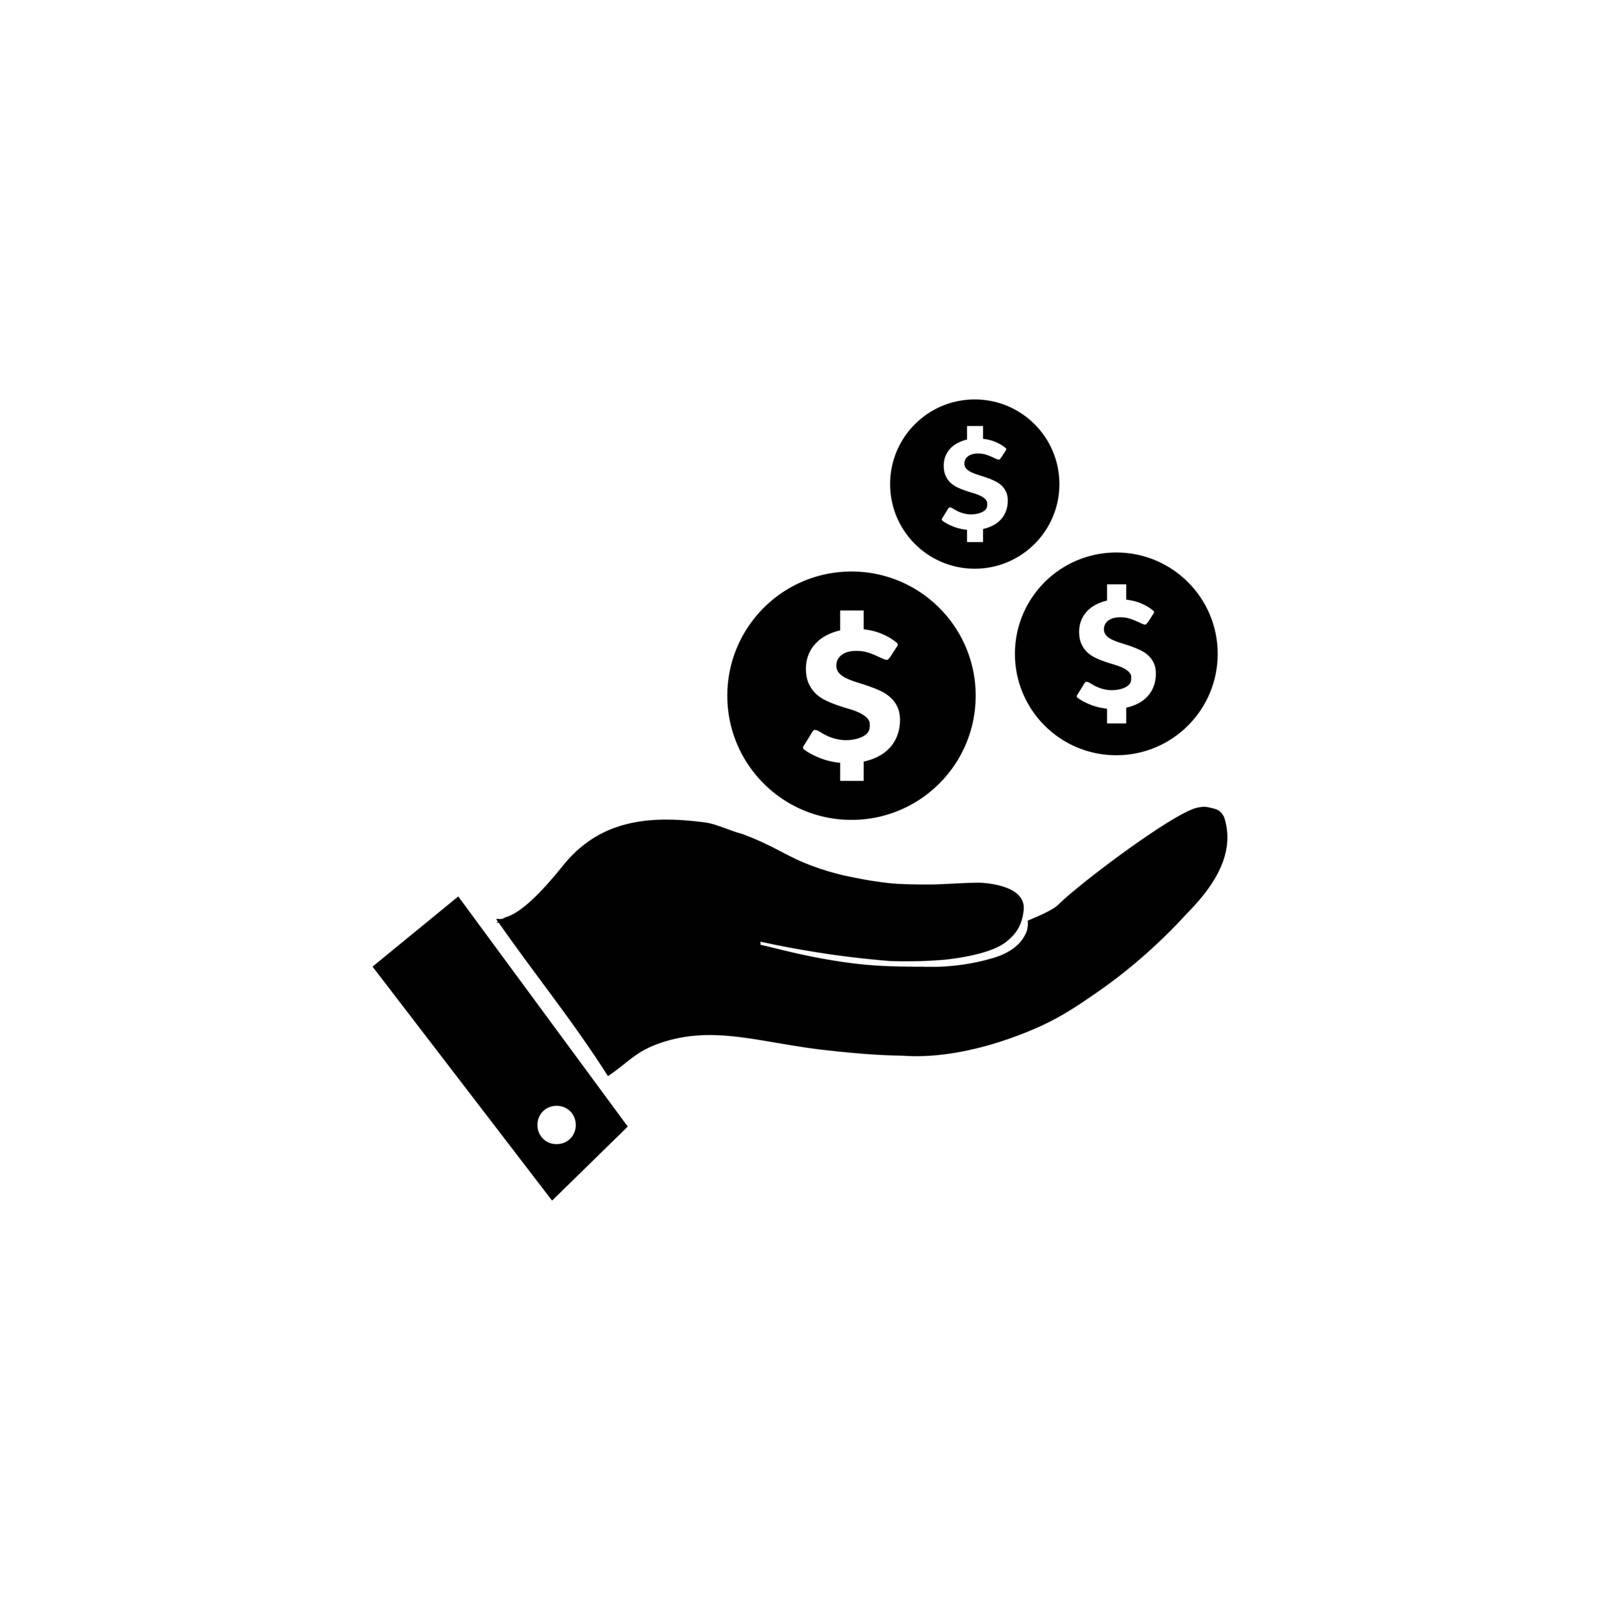 Earn money icon. Money in hand symbol in flat style isolated on white background. Coins in hand sign. Simple black hand with dollars vector abstract icon for web site design or button to mobile app.